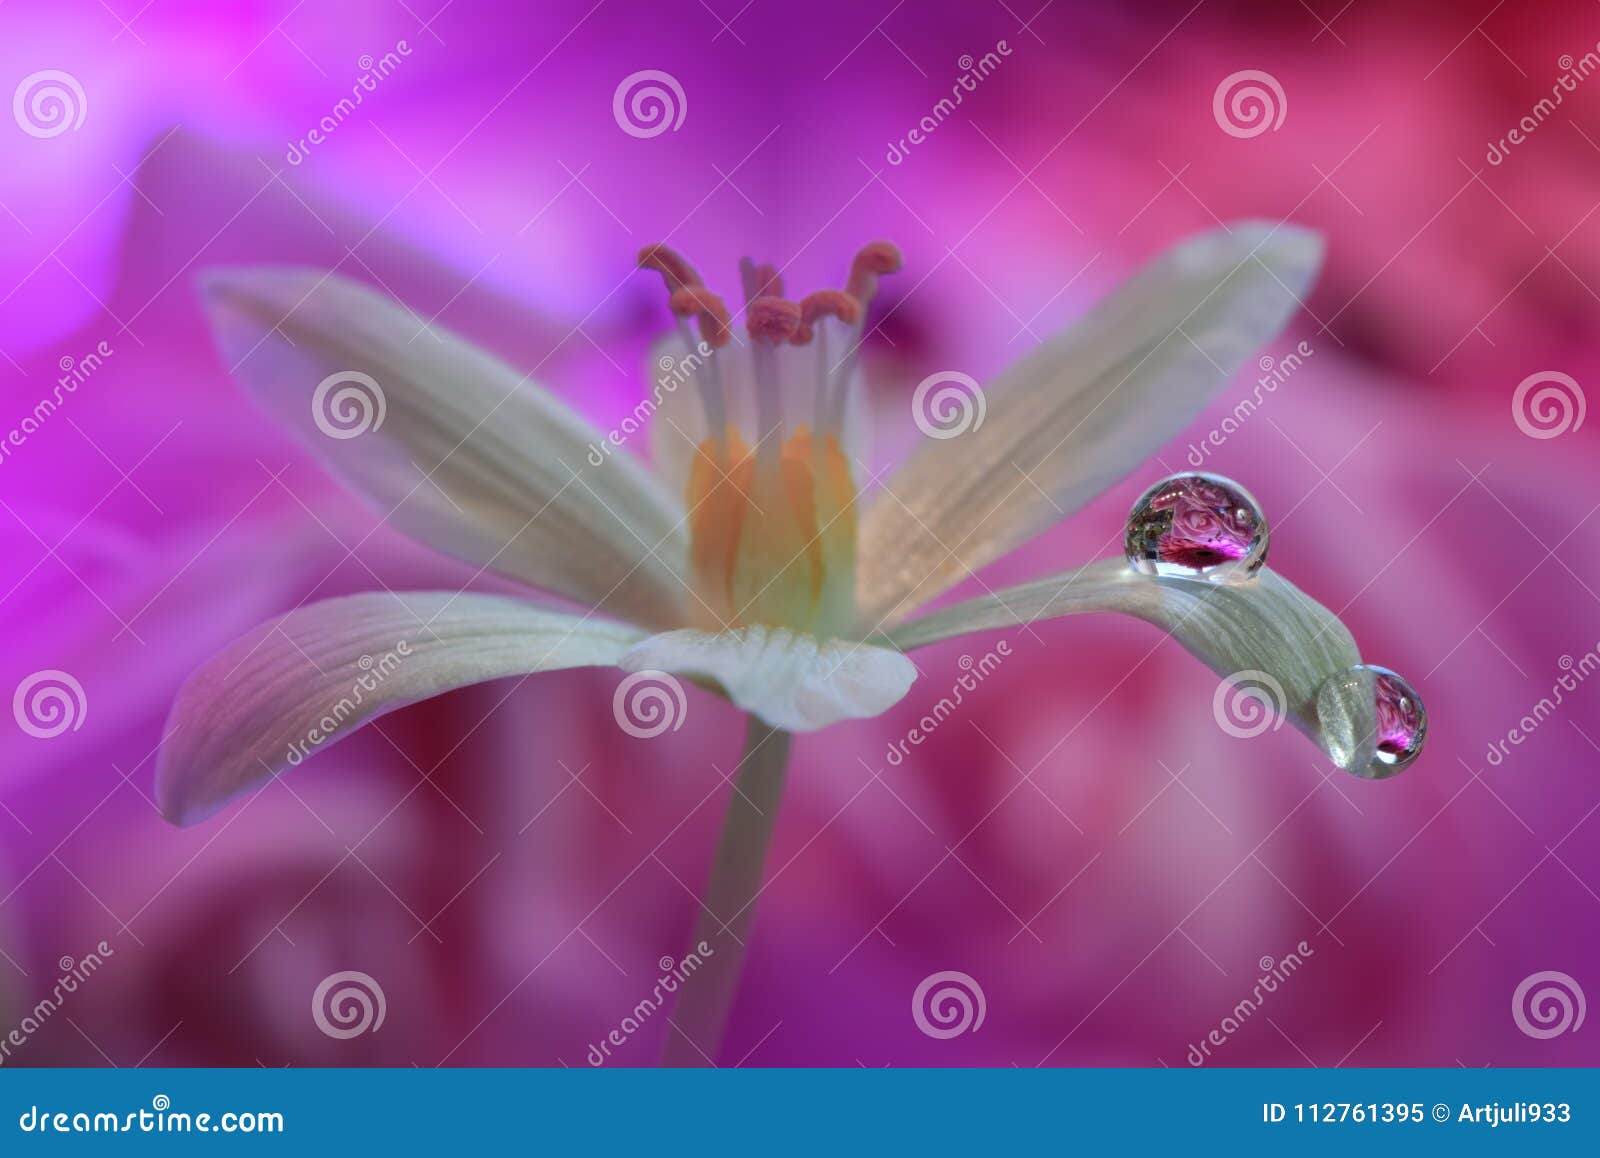 abstract macro photo flower water drops artistic motion background desktop flowers made pastel tones tranquil 112761395